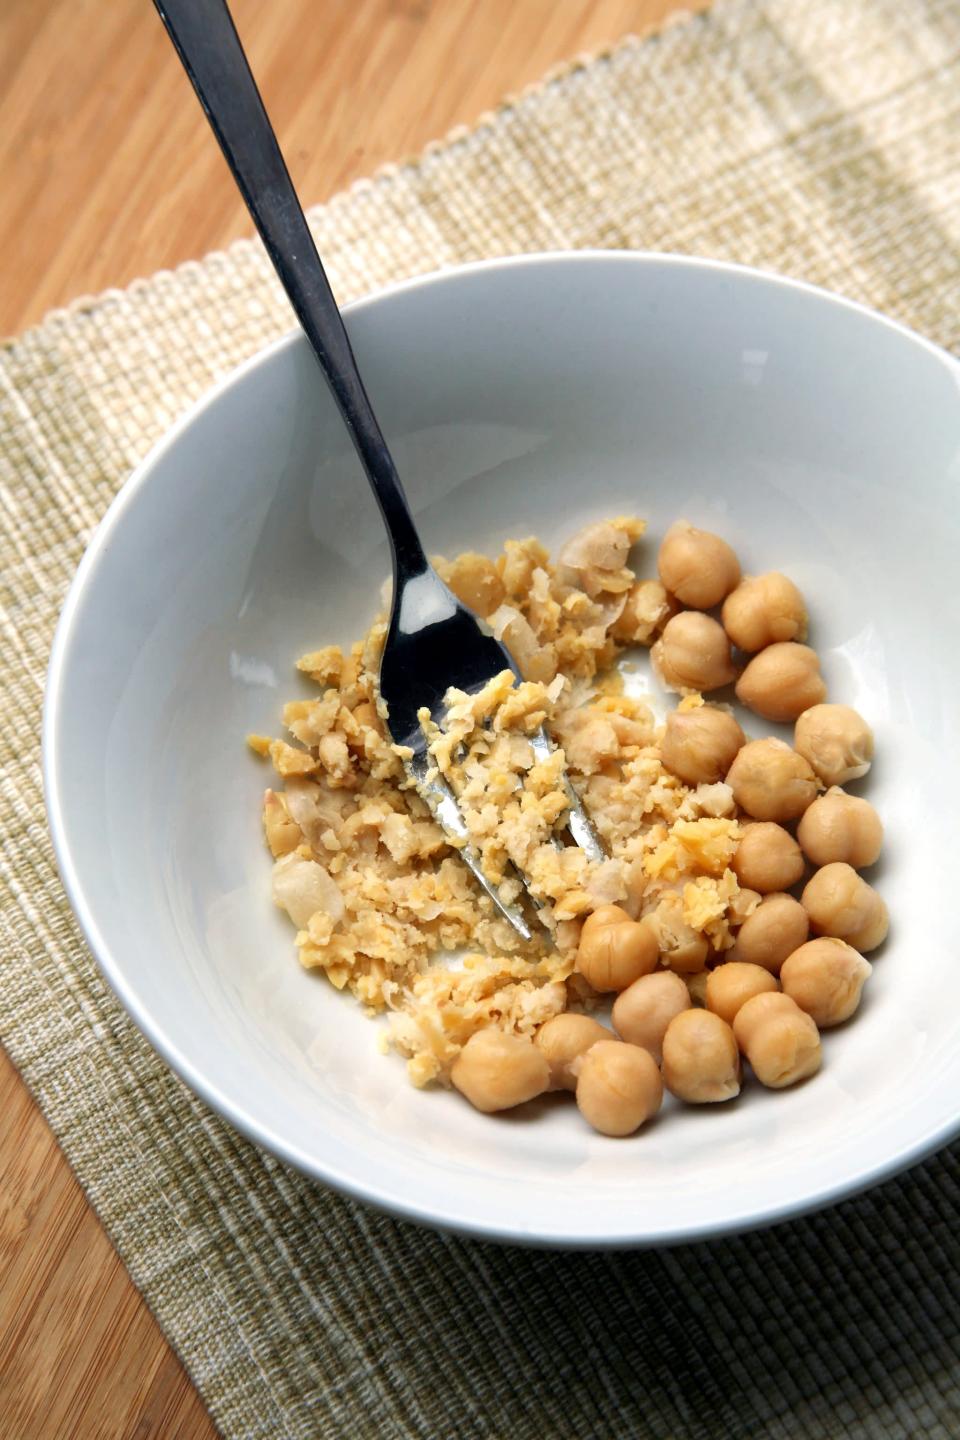 <p>Just <a href="https://www.popsugar.com/fitness/How-Add-More-Protein-Your-Oatmeal-40553263" class="link " rel="nofollow noopener" target="_blank" data-ylk="slk:mash one-quarter cup of garbanzo beans into your bowl">mash one-quarter cup of garbanzo beans into your bowl</a>. Then add the rolled oats, liquid, sweetener, and toppings of your choice, heat it up, and boom - for 65 extra calories, you get <a href="http://www.edenfoods.com/store/images/products/nlea/102960.gif" class="link " rel="nofollow noopener" target="_blank" data-ylk="slk:3.5 grams of protein">3.5 grams of protein</a> and 2.5 grams of fiber. </p> <p>The smashed chickpeas add a creaminess that blends right into the oatmeal, so you won't notice them one bit. This hack works with white beans, too, and if your oatmeal is chocolate flavored, you can use black beans.</p> <p><strong>Try this recipe:</strong> <a href="https://www.popsugar.com/fitness/Banana-Cashew-Overnight-Oats-40463726" class="link " rel="nofollow noopener" target="_blank" data-ylk="slk:banana cashew overnight oats">banana cashew overnight oats</a></p>